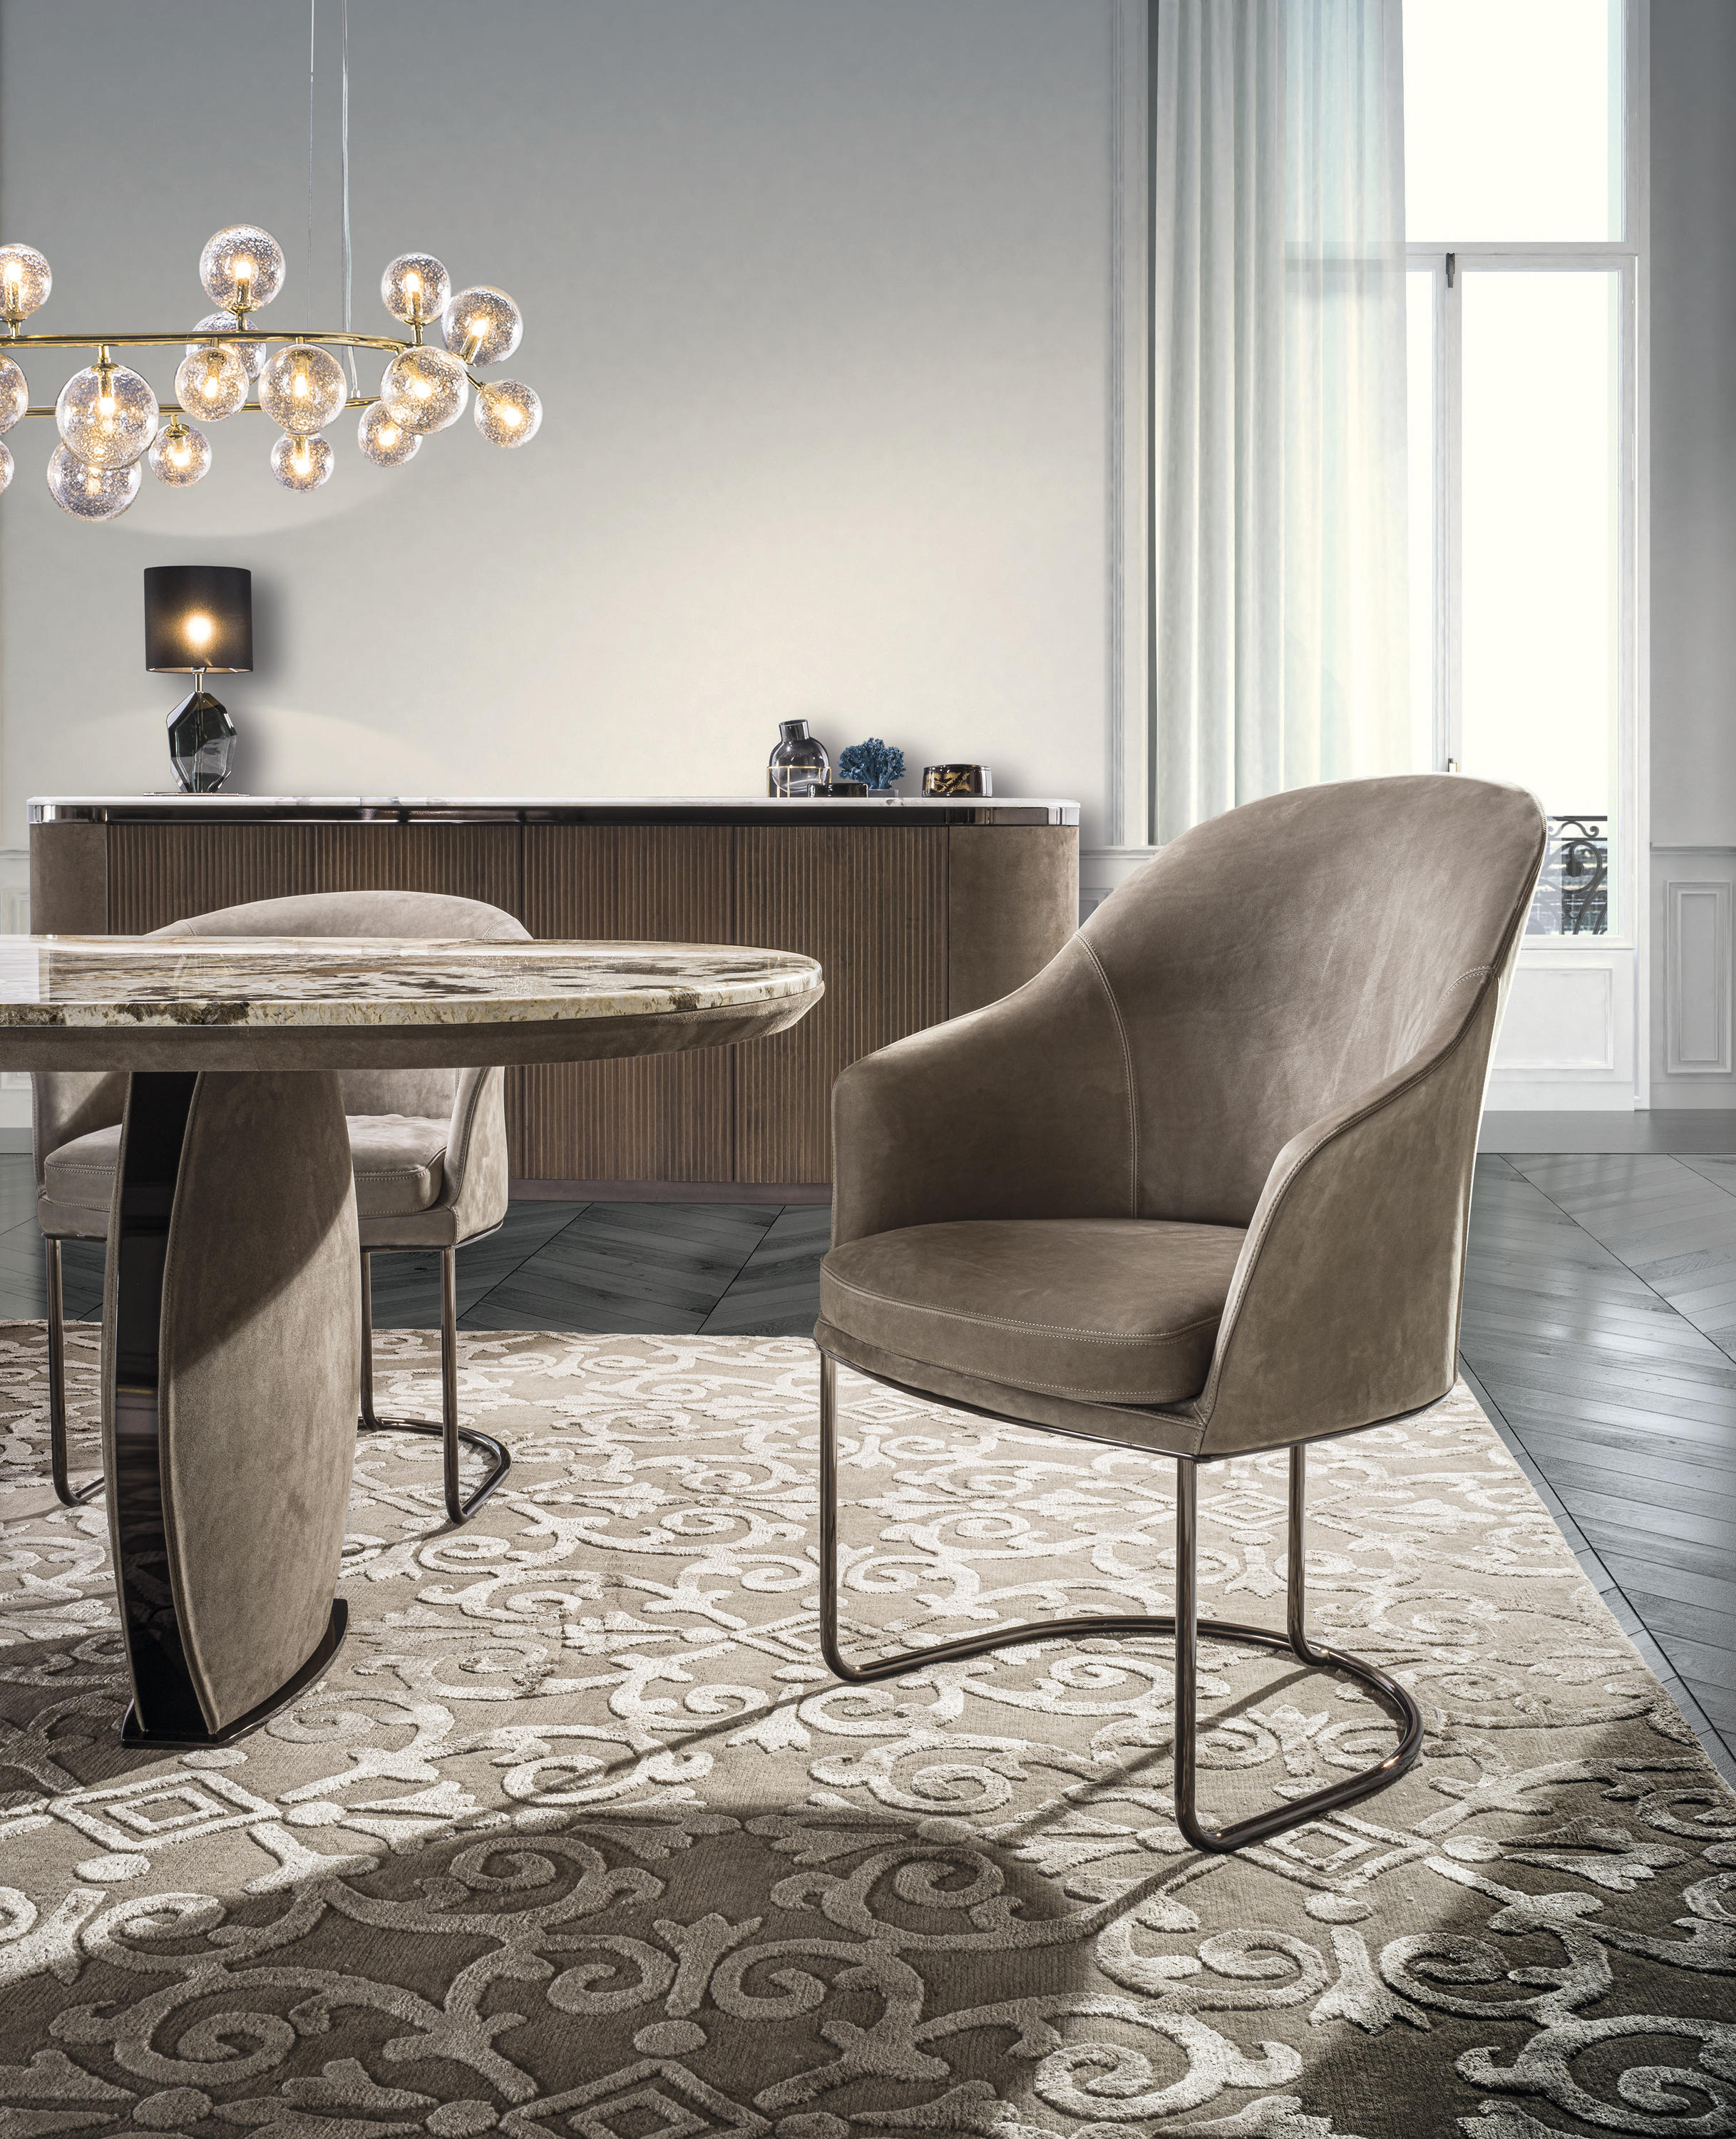 LILY - Chairs from Longhi S.p.a. | Architonic